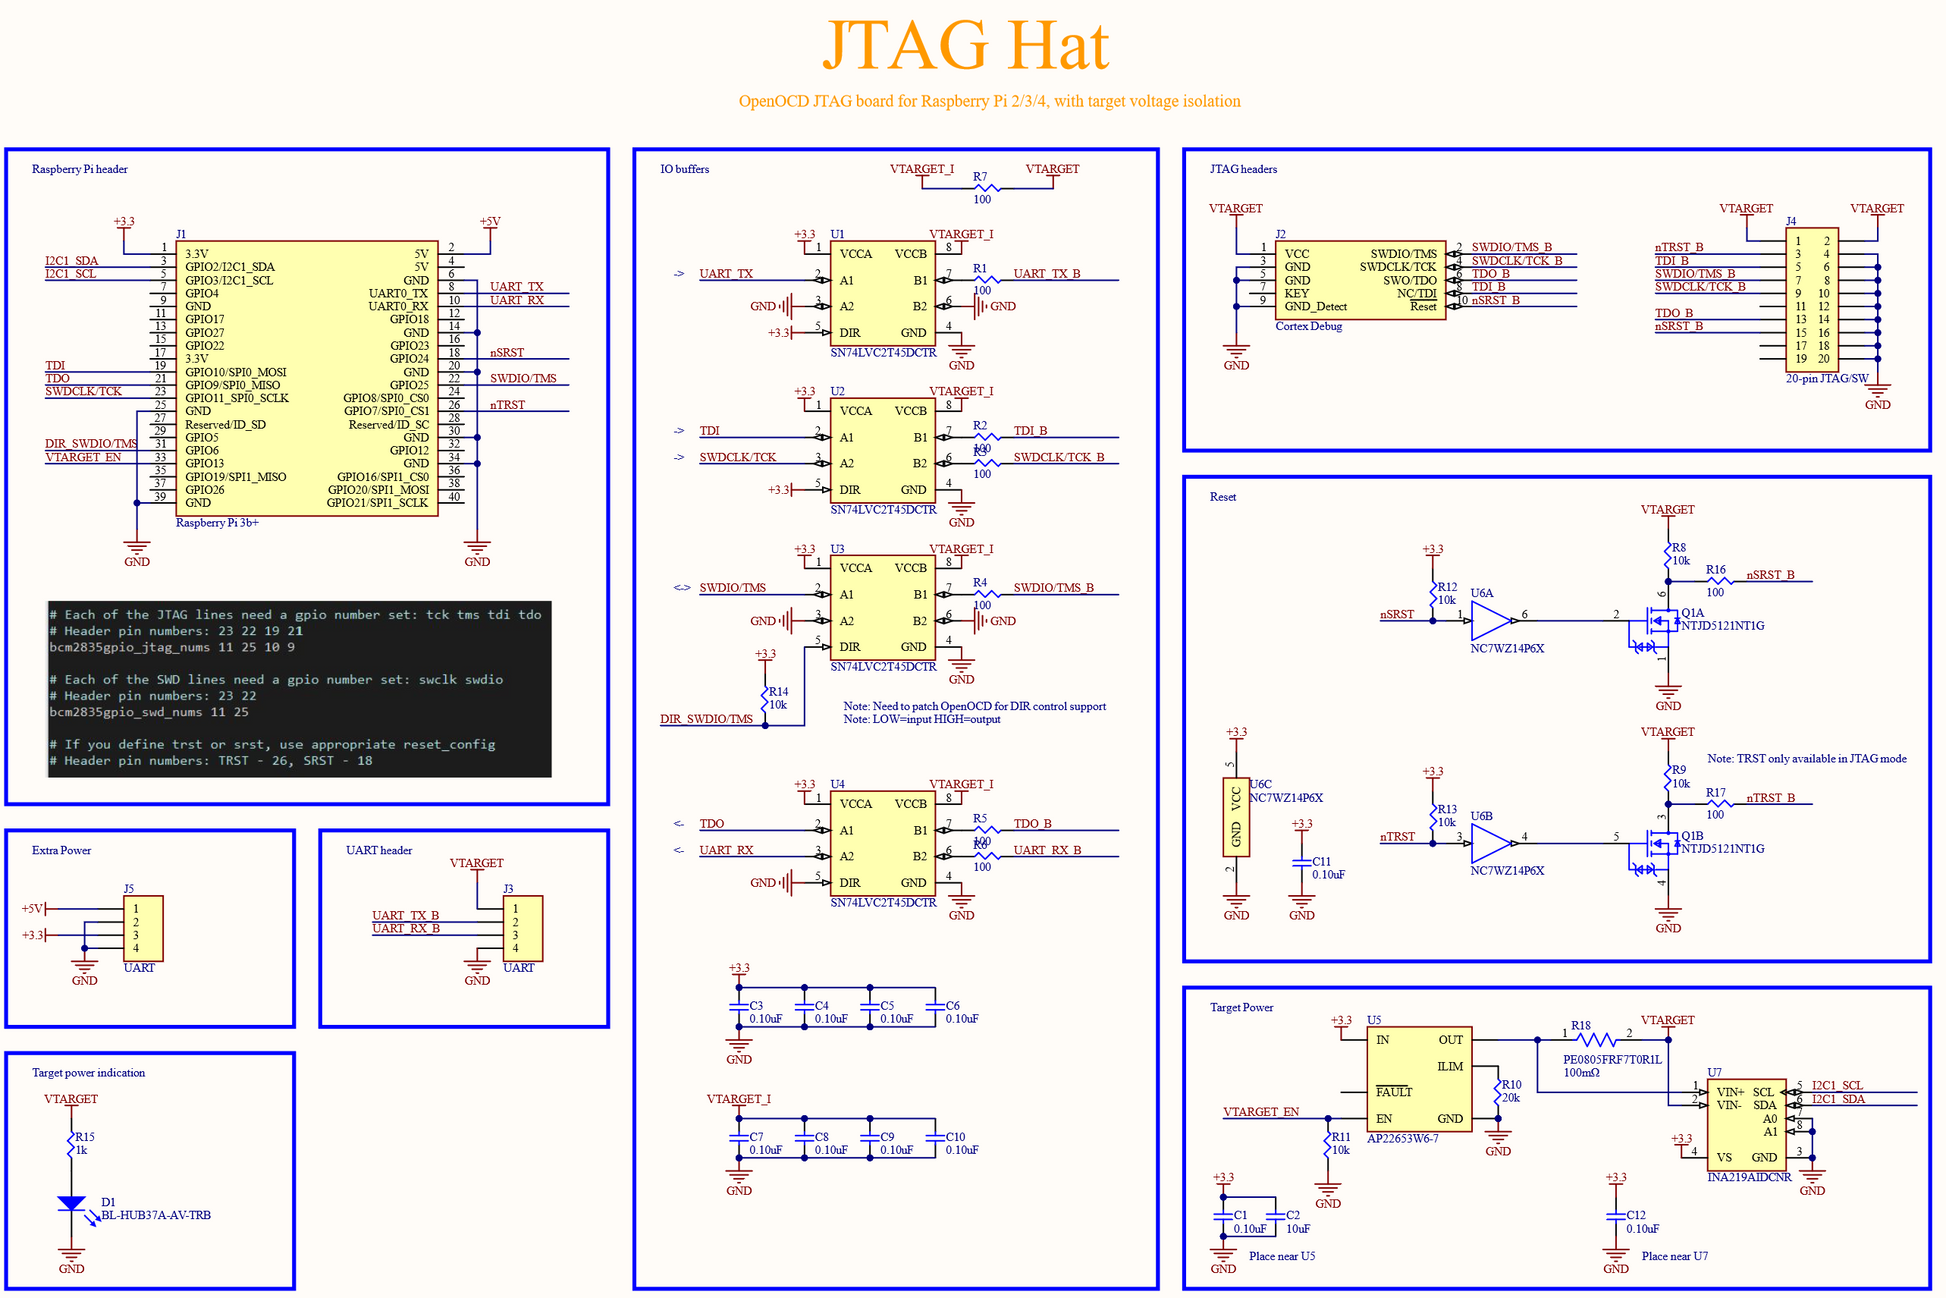 JTAG Hat electronic schematic